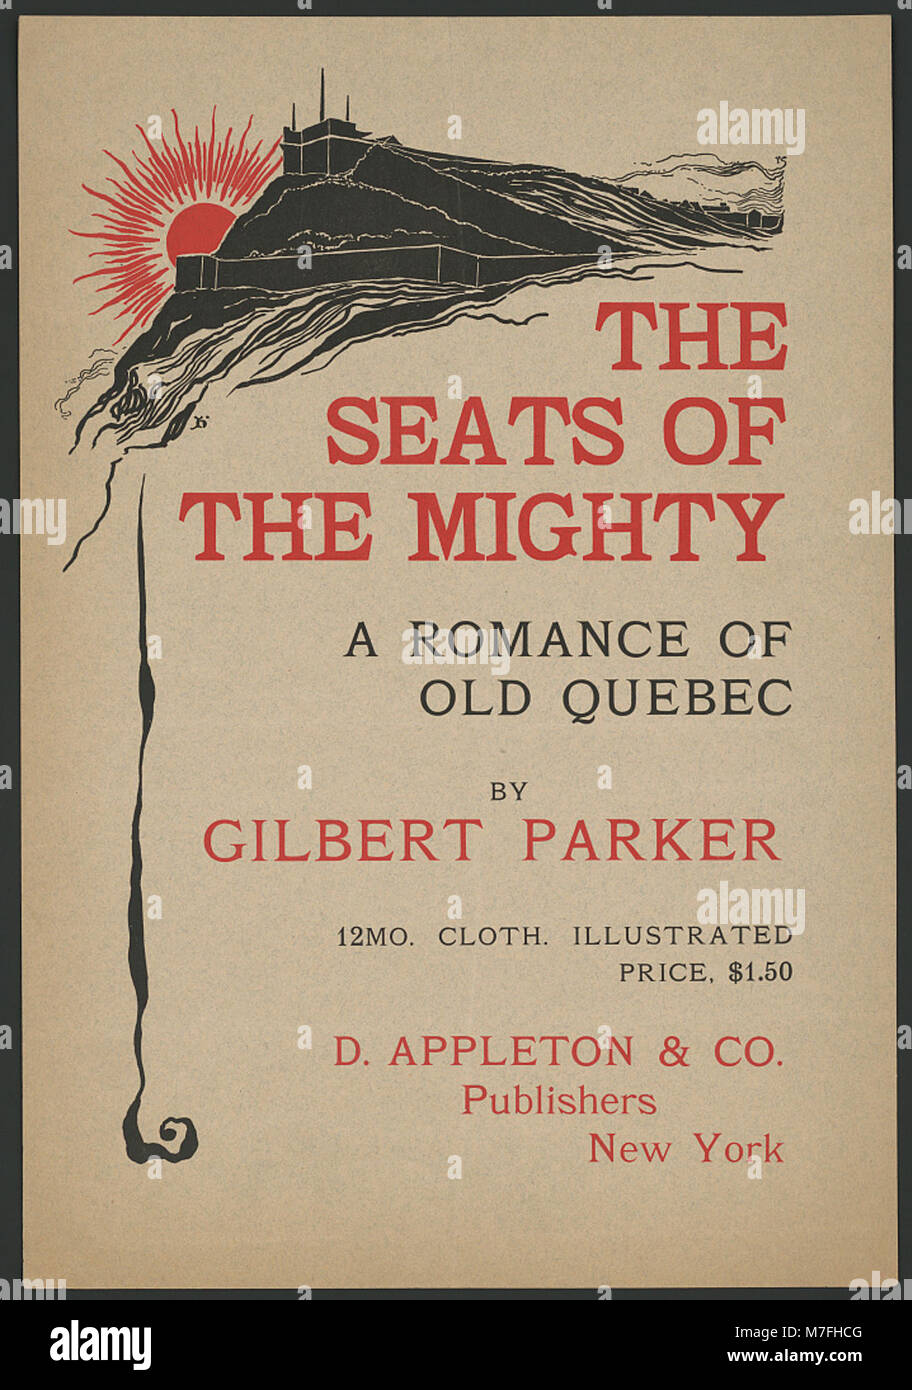 The seats of the mighty, a romance of old Quebec by Gilbert Parker ... D. Appleton & Co., publishers, New York - H. LCCN2014649710 Stock Photo